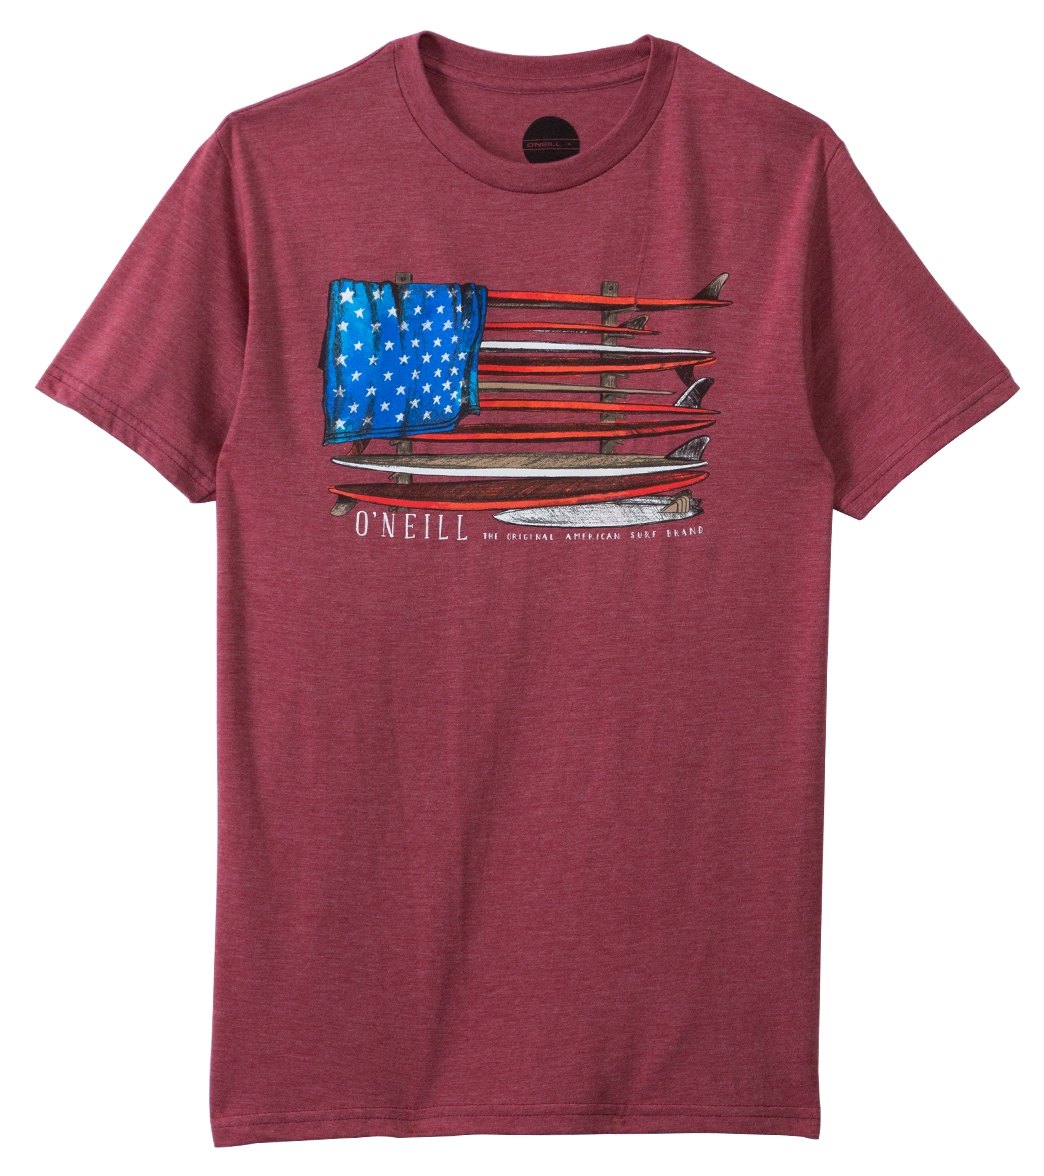 O'Neill Men's United Short Sleeve Tee at SwimOutlet.com